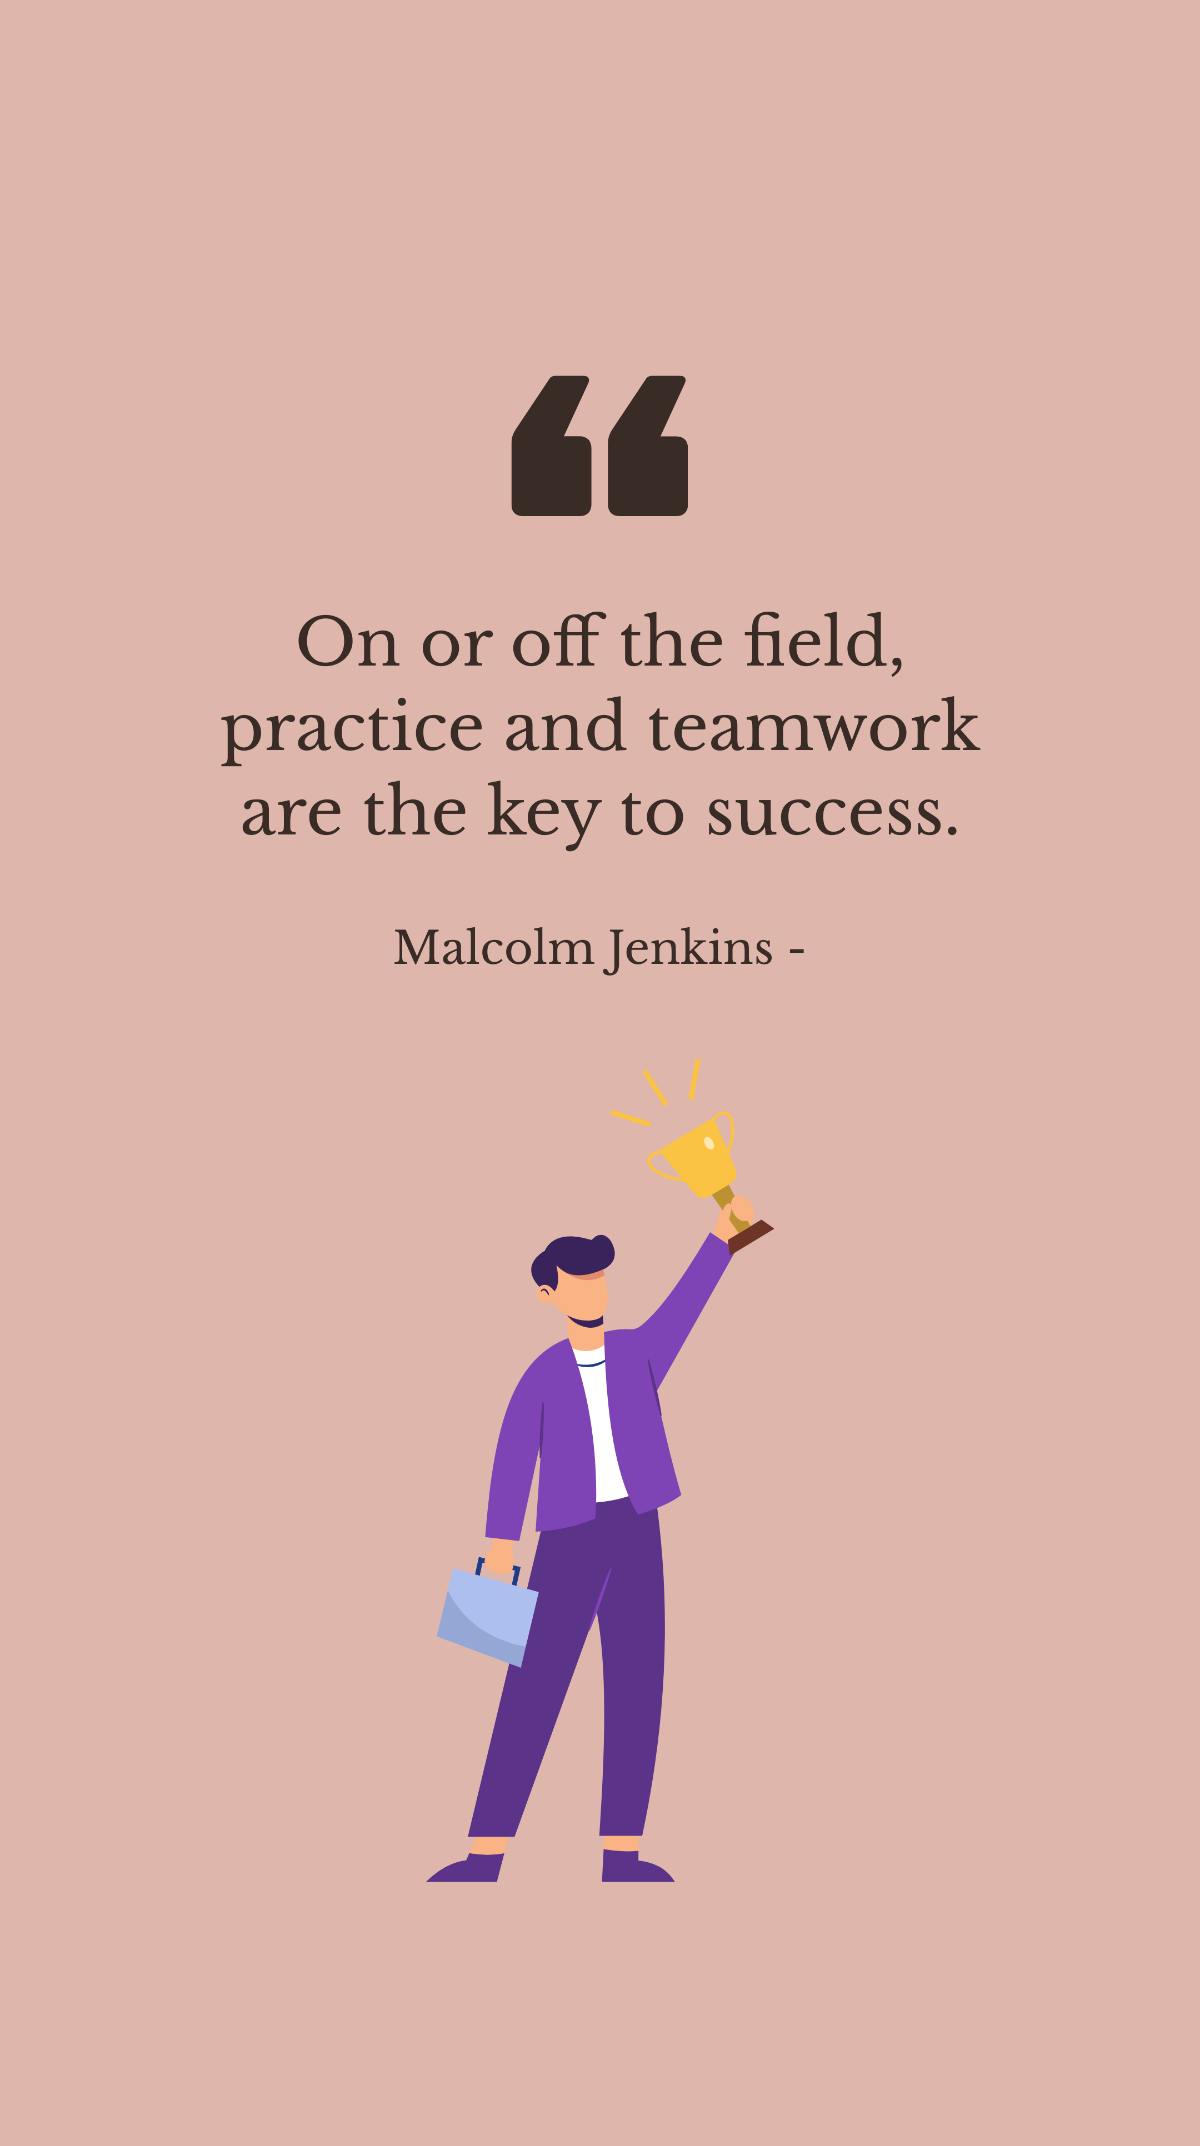 Malcolm Jenkins - On or off the field, practice and teamwork are the key to success. Template